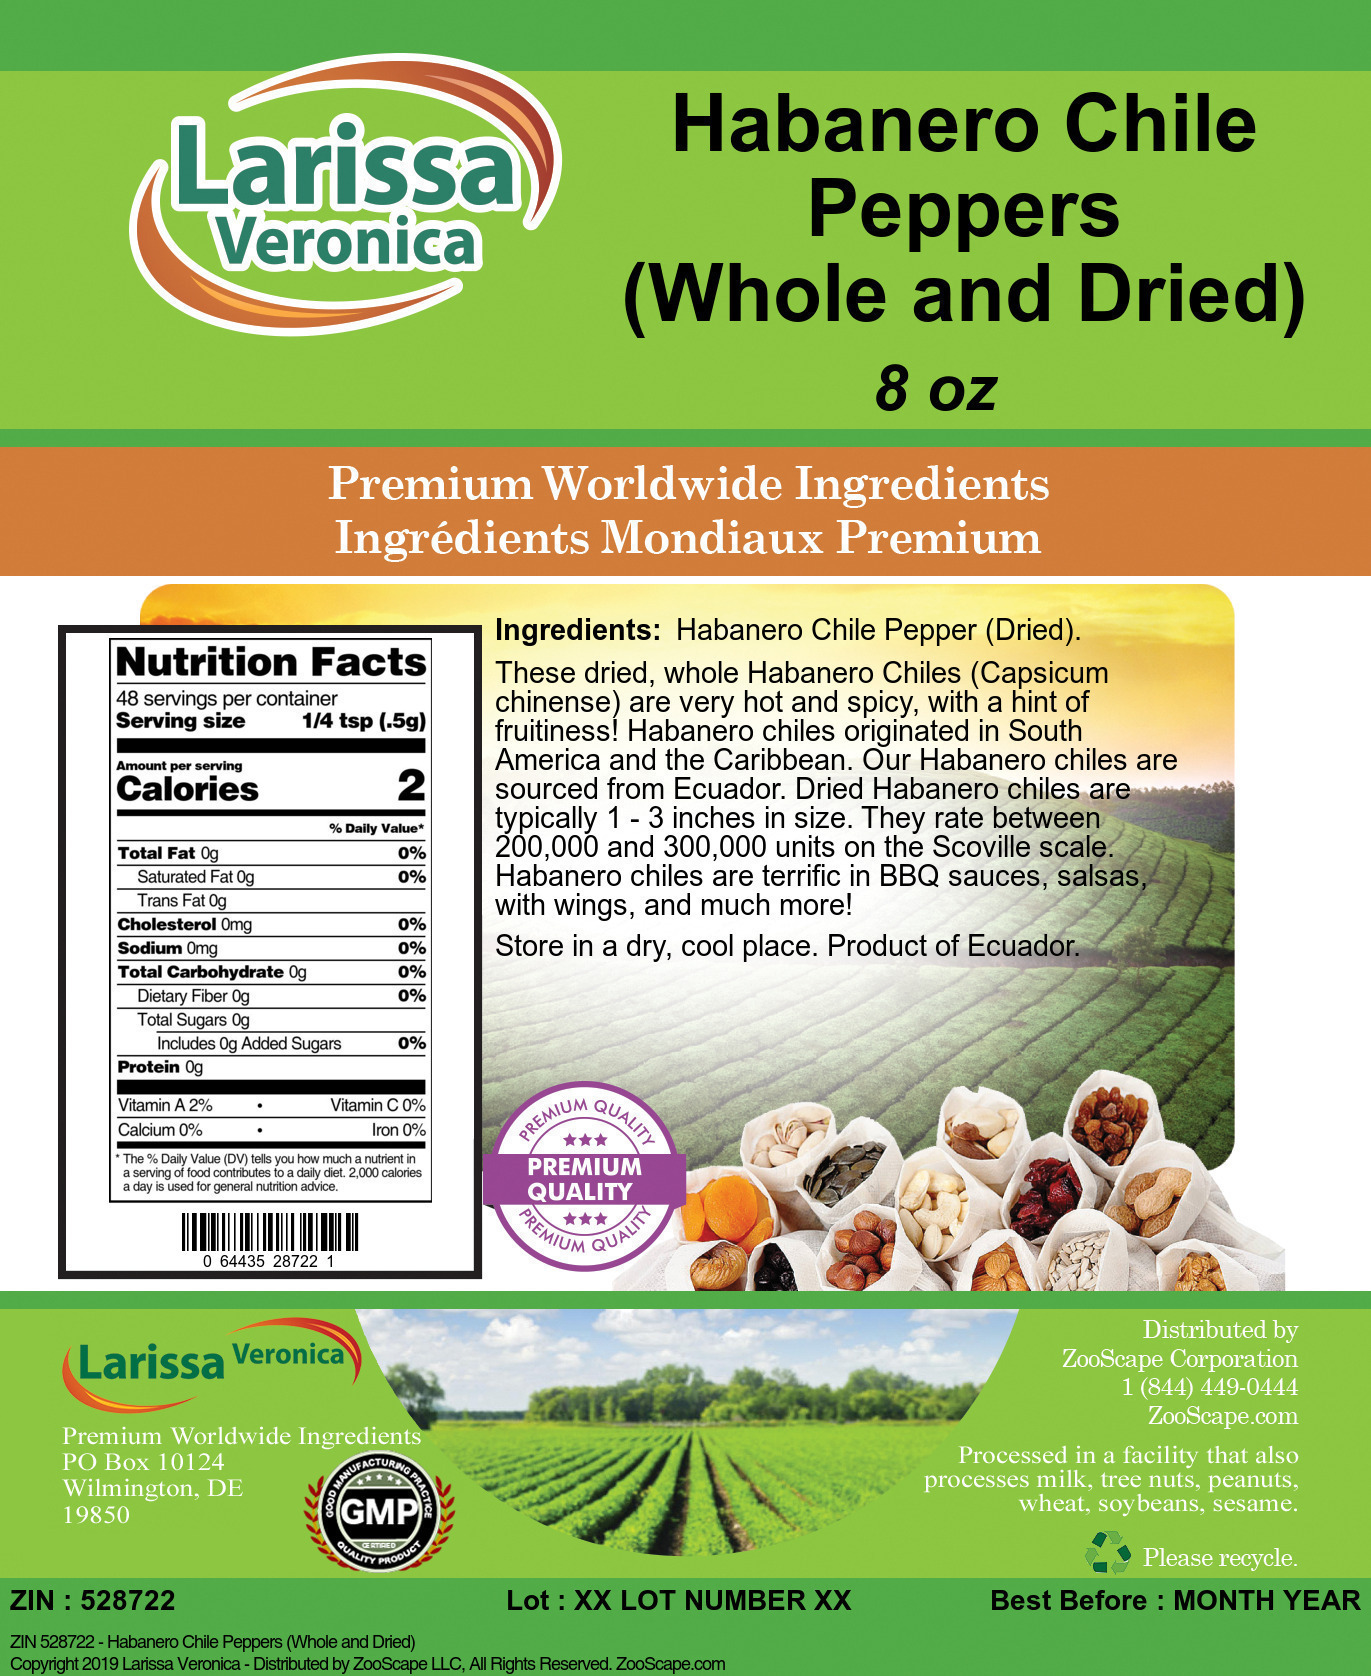 Habanero Chile Peppers (Whole and Dried) - Label